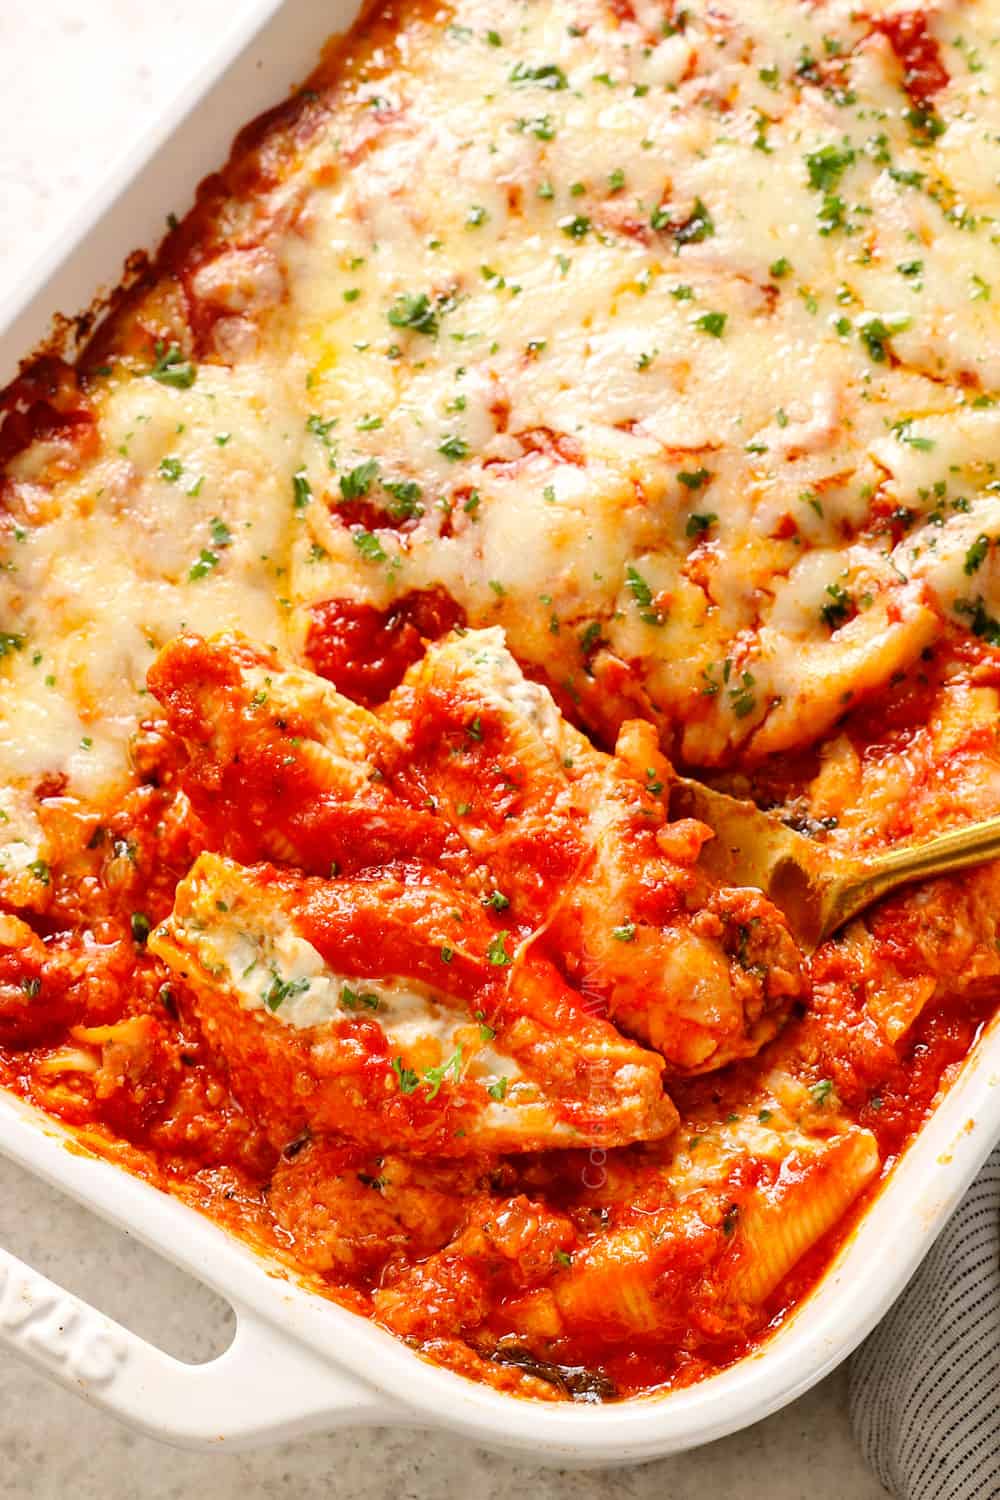 scooping up stuffed pasta shells with meat showing how meaty and cheesy it is